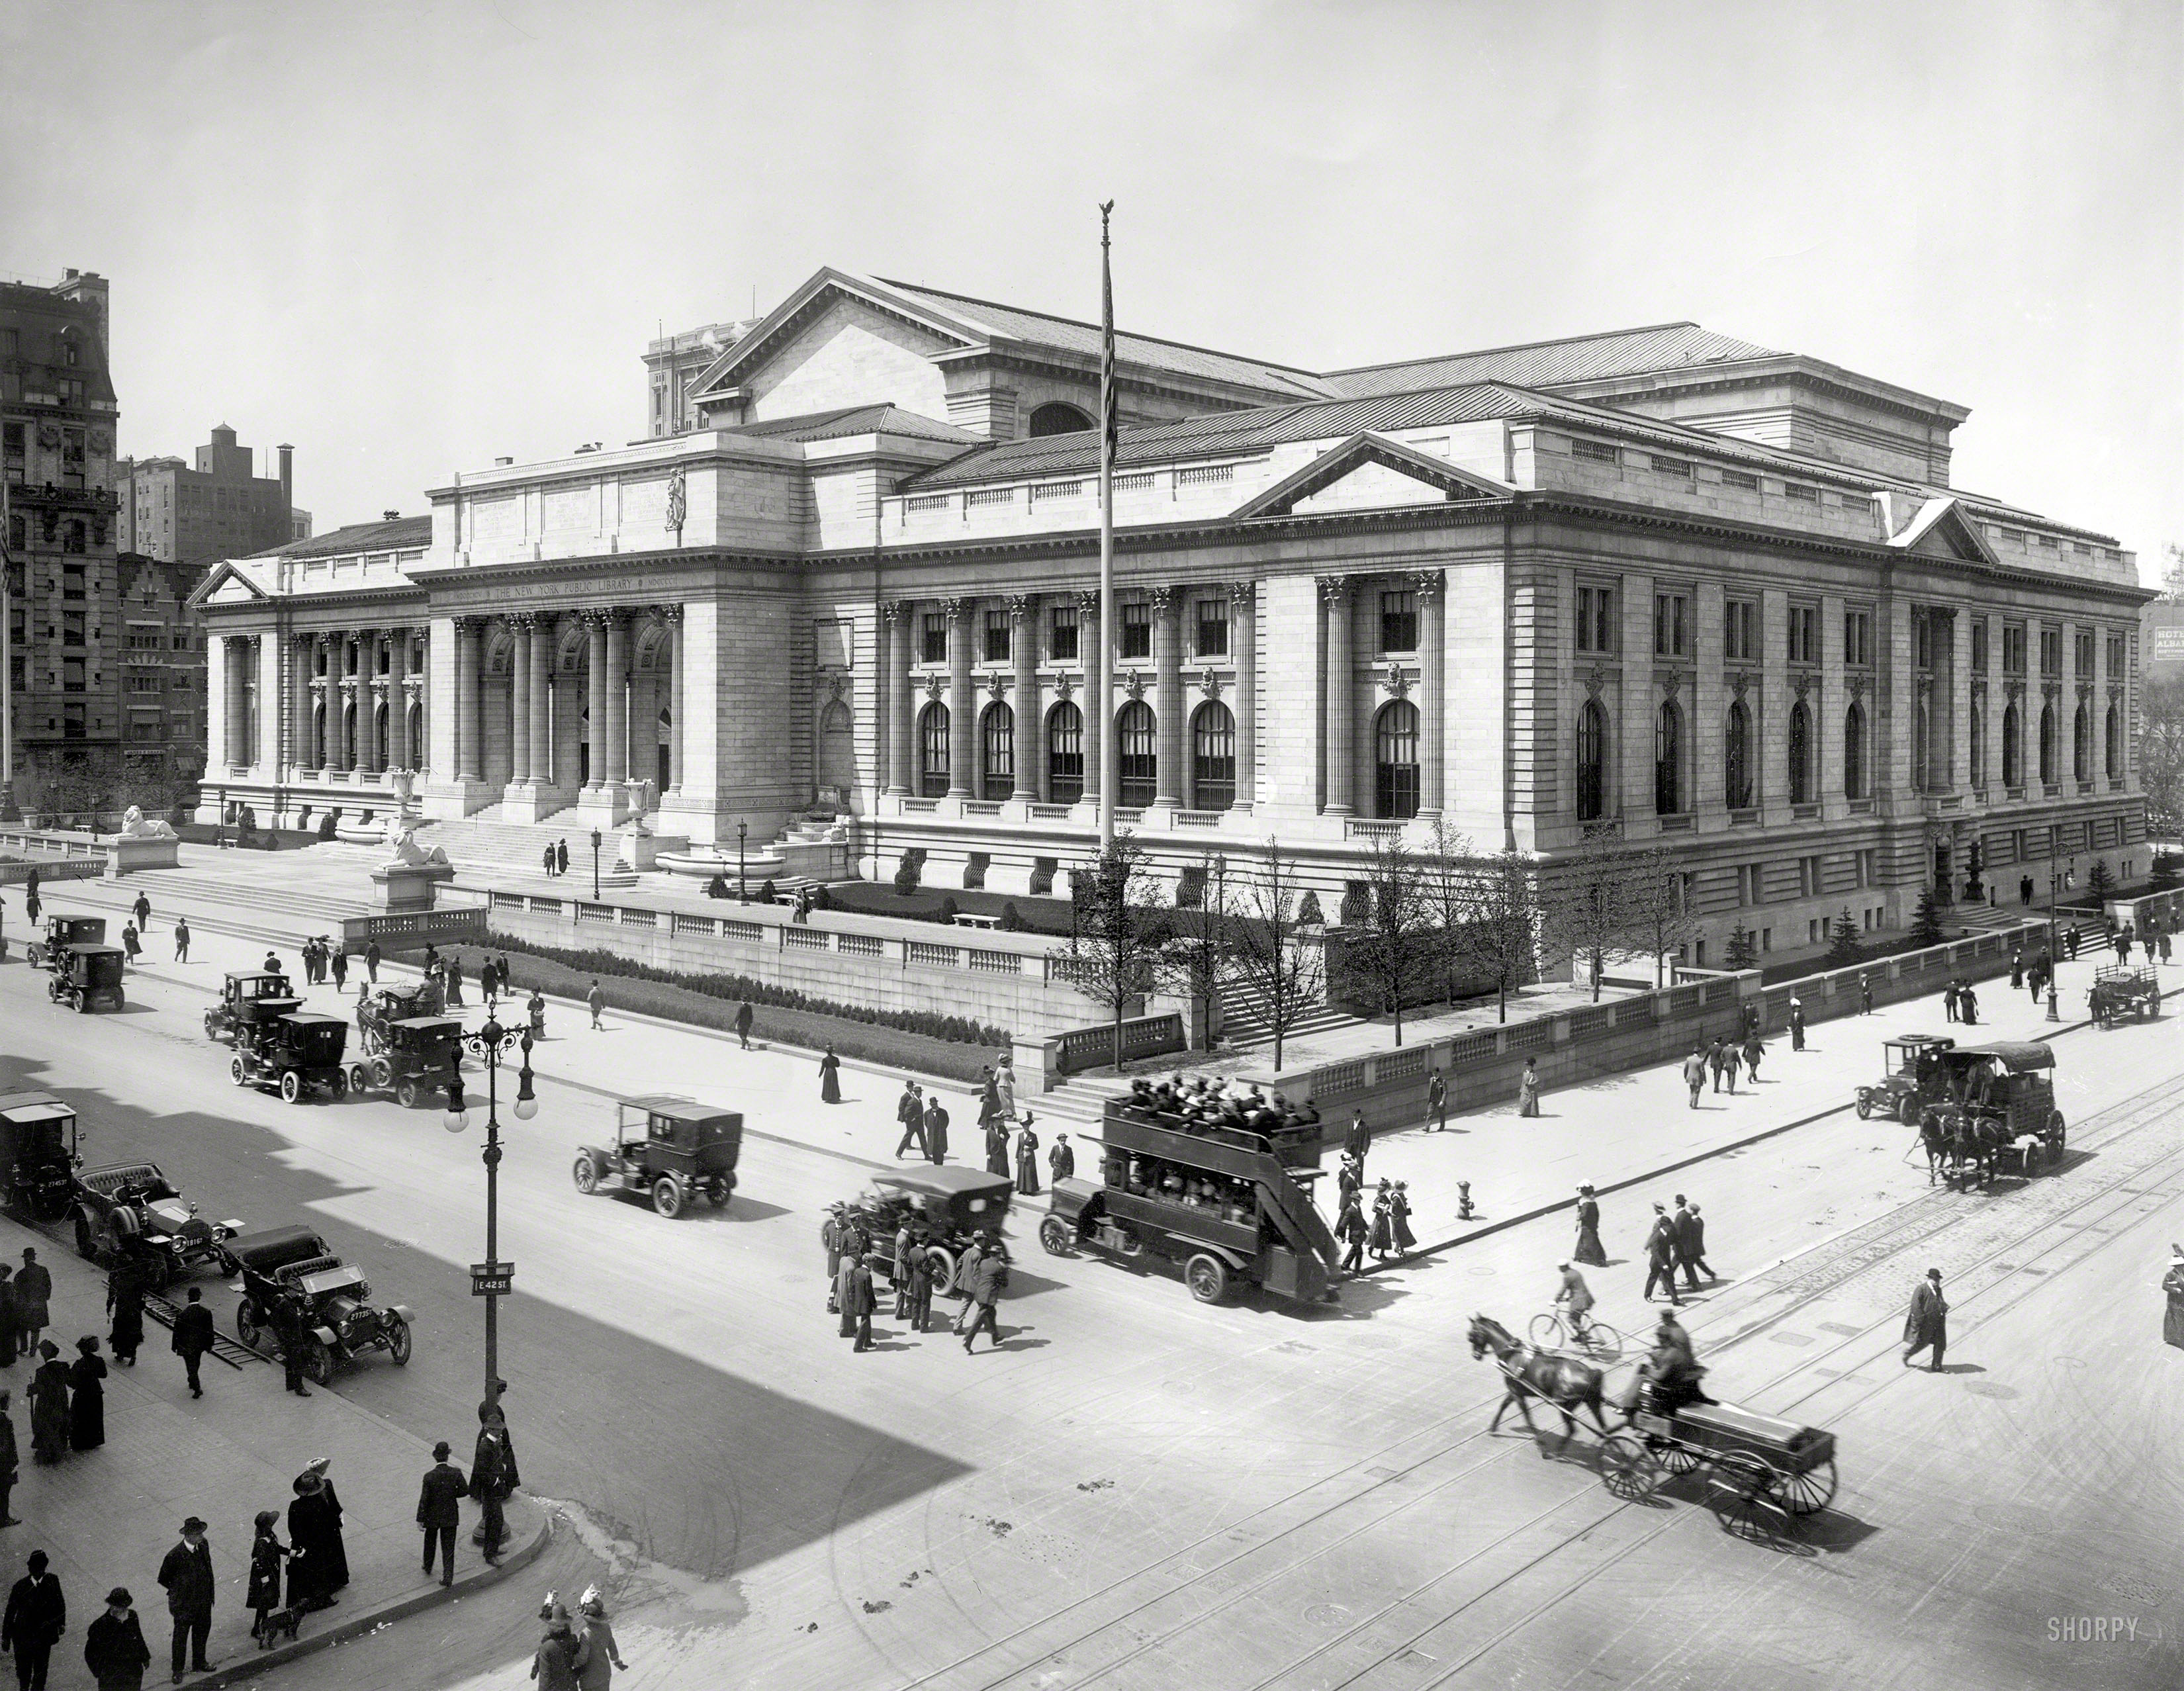 Circa 1912. "New York Public Library building." With a variety of motorized conveyances. 8x10 glass negative, Detroit Publishing Co. View full size.